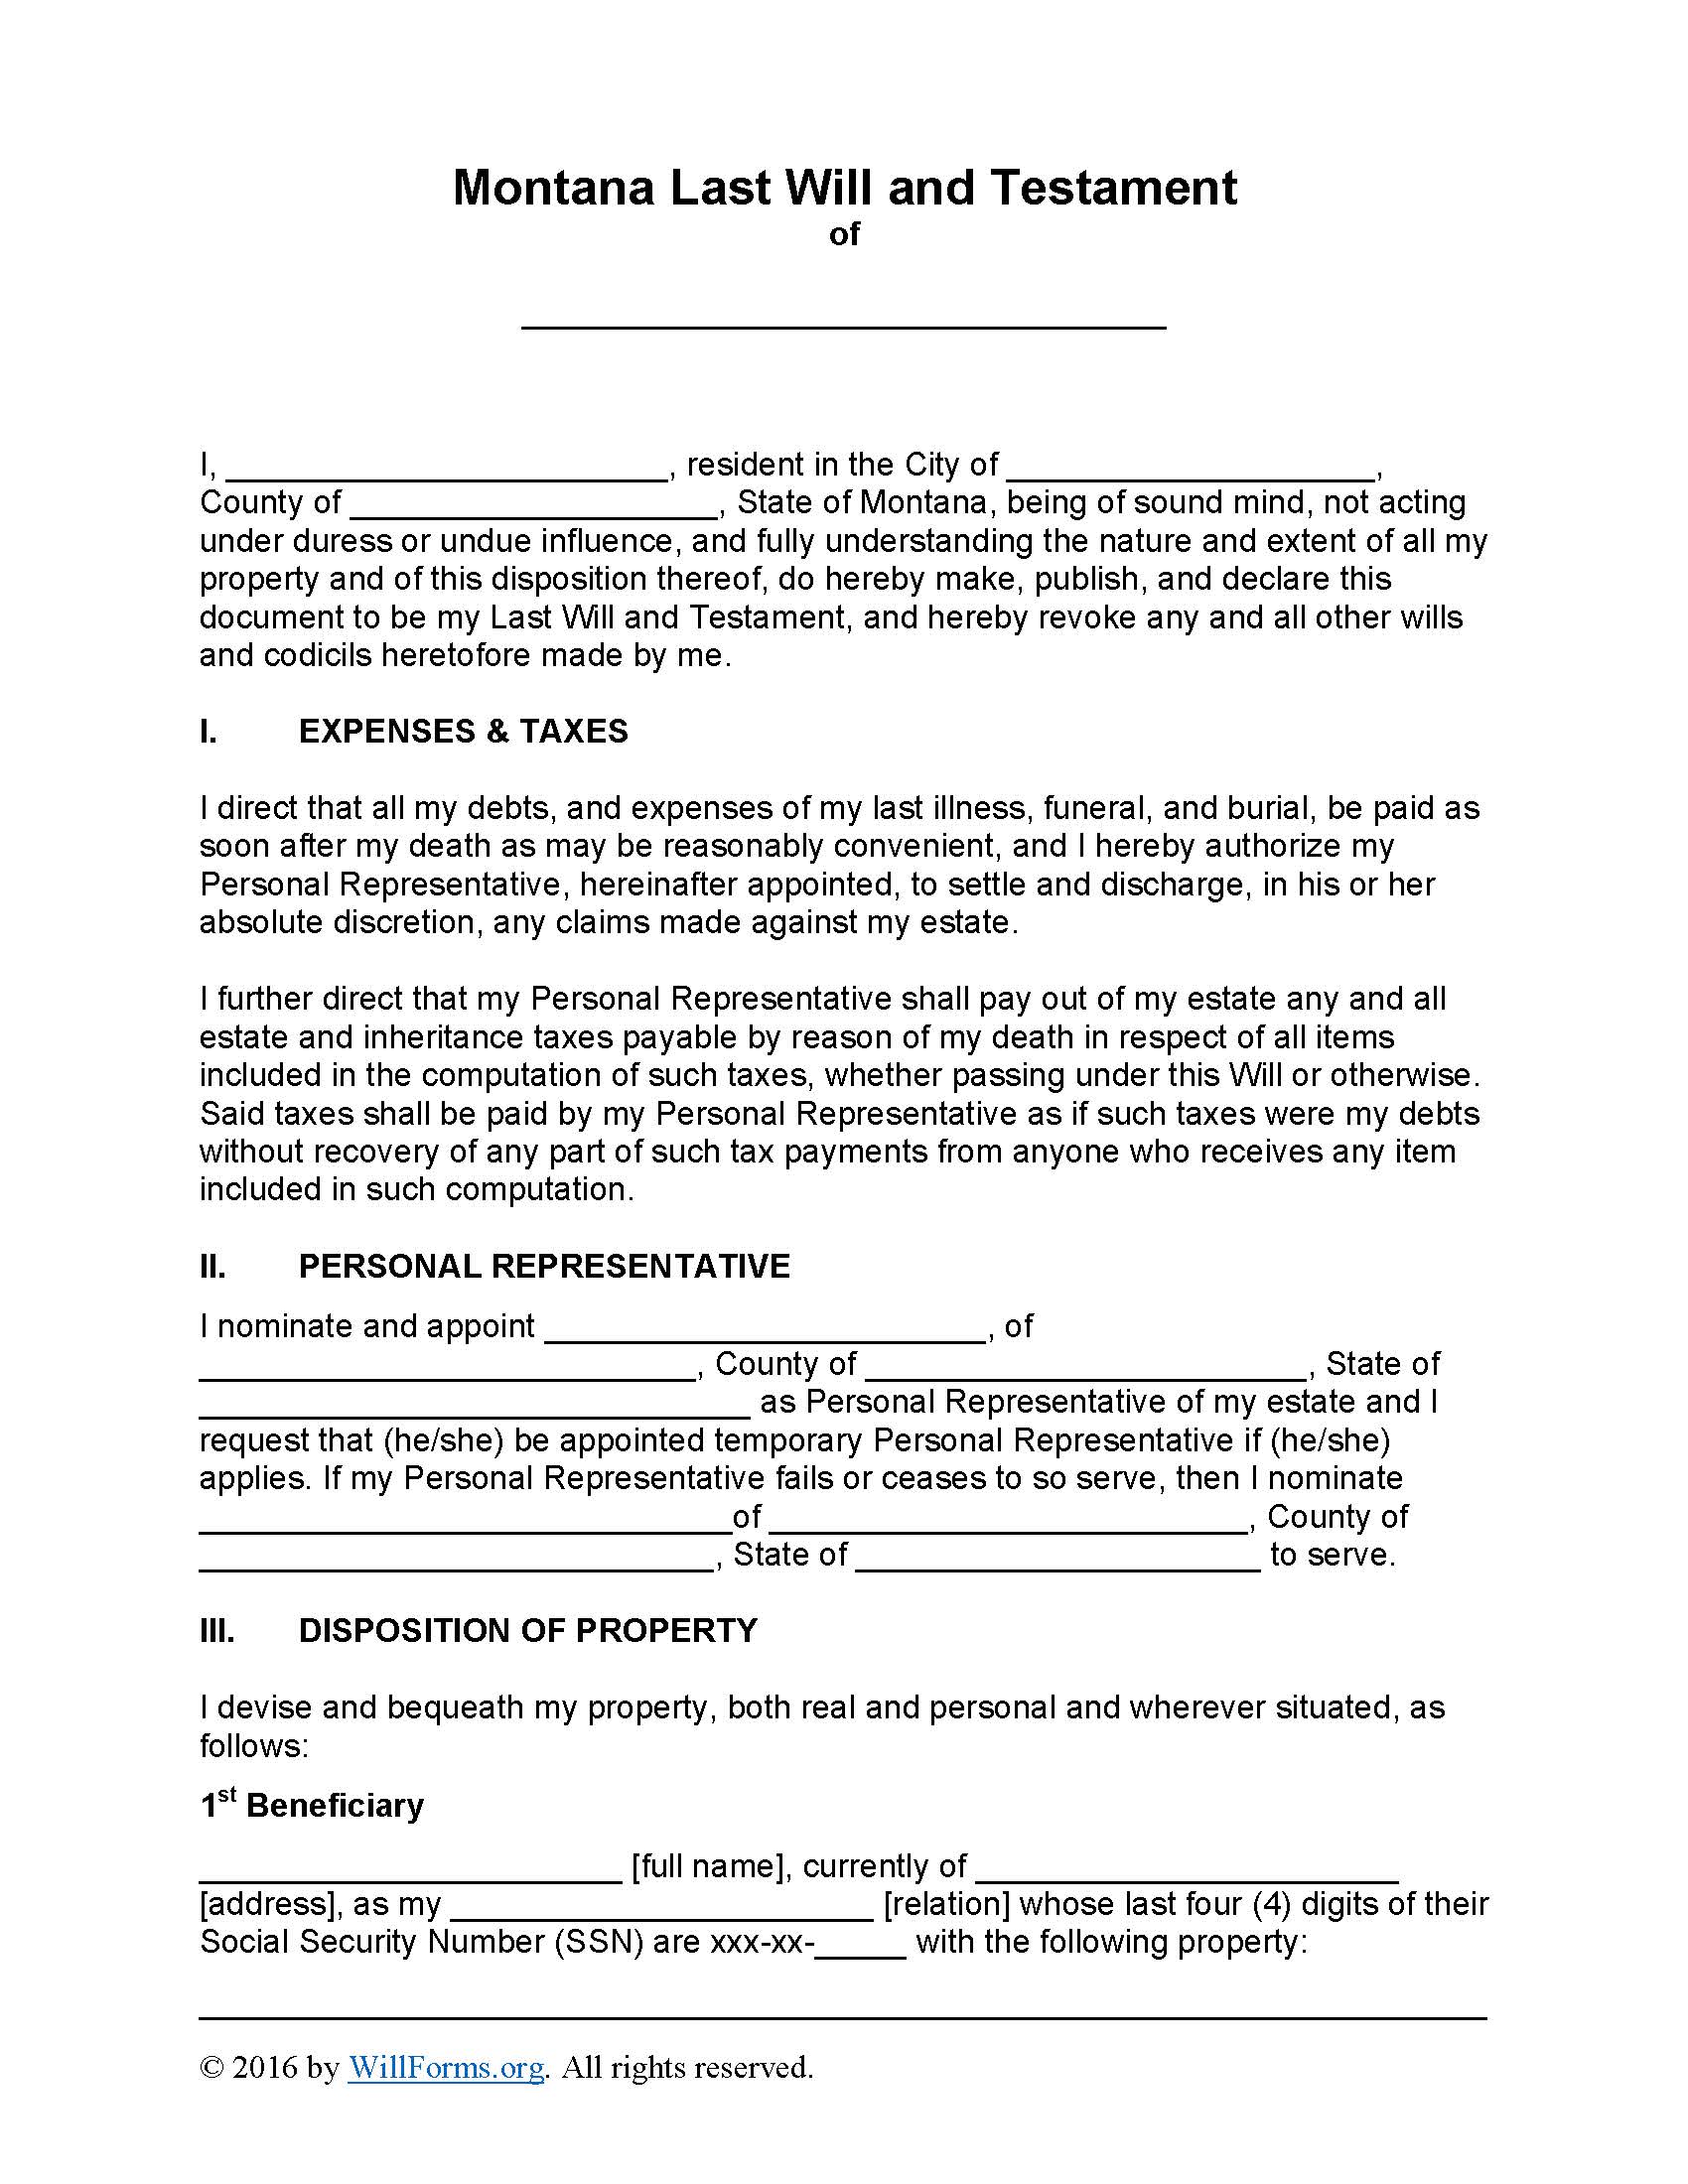 Montana Last Will and Testament Form